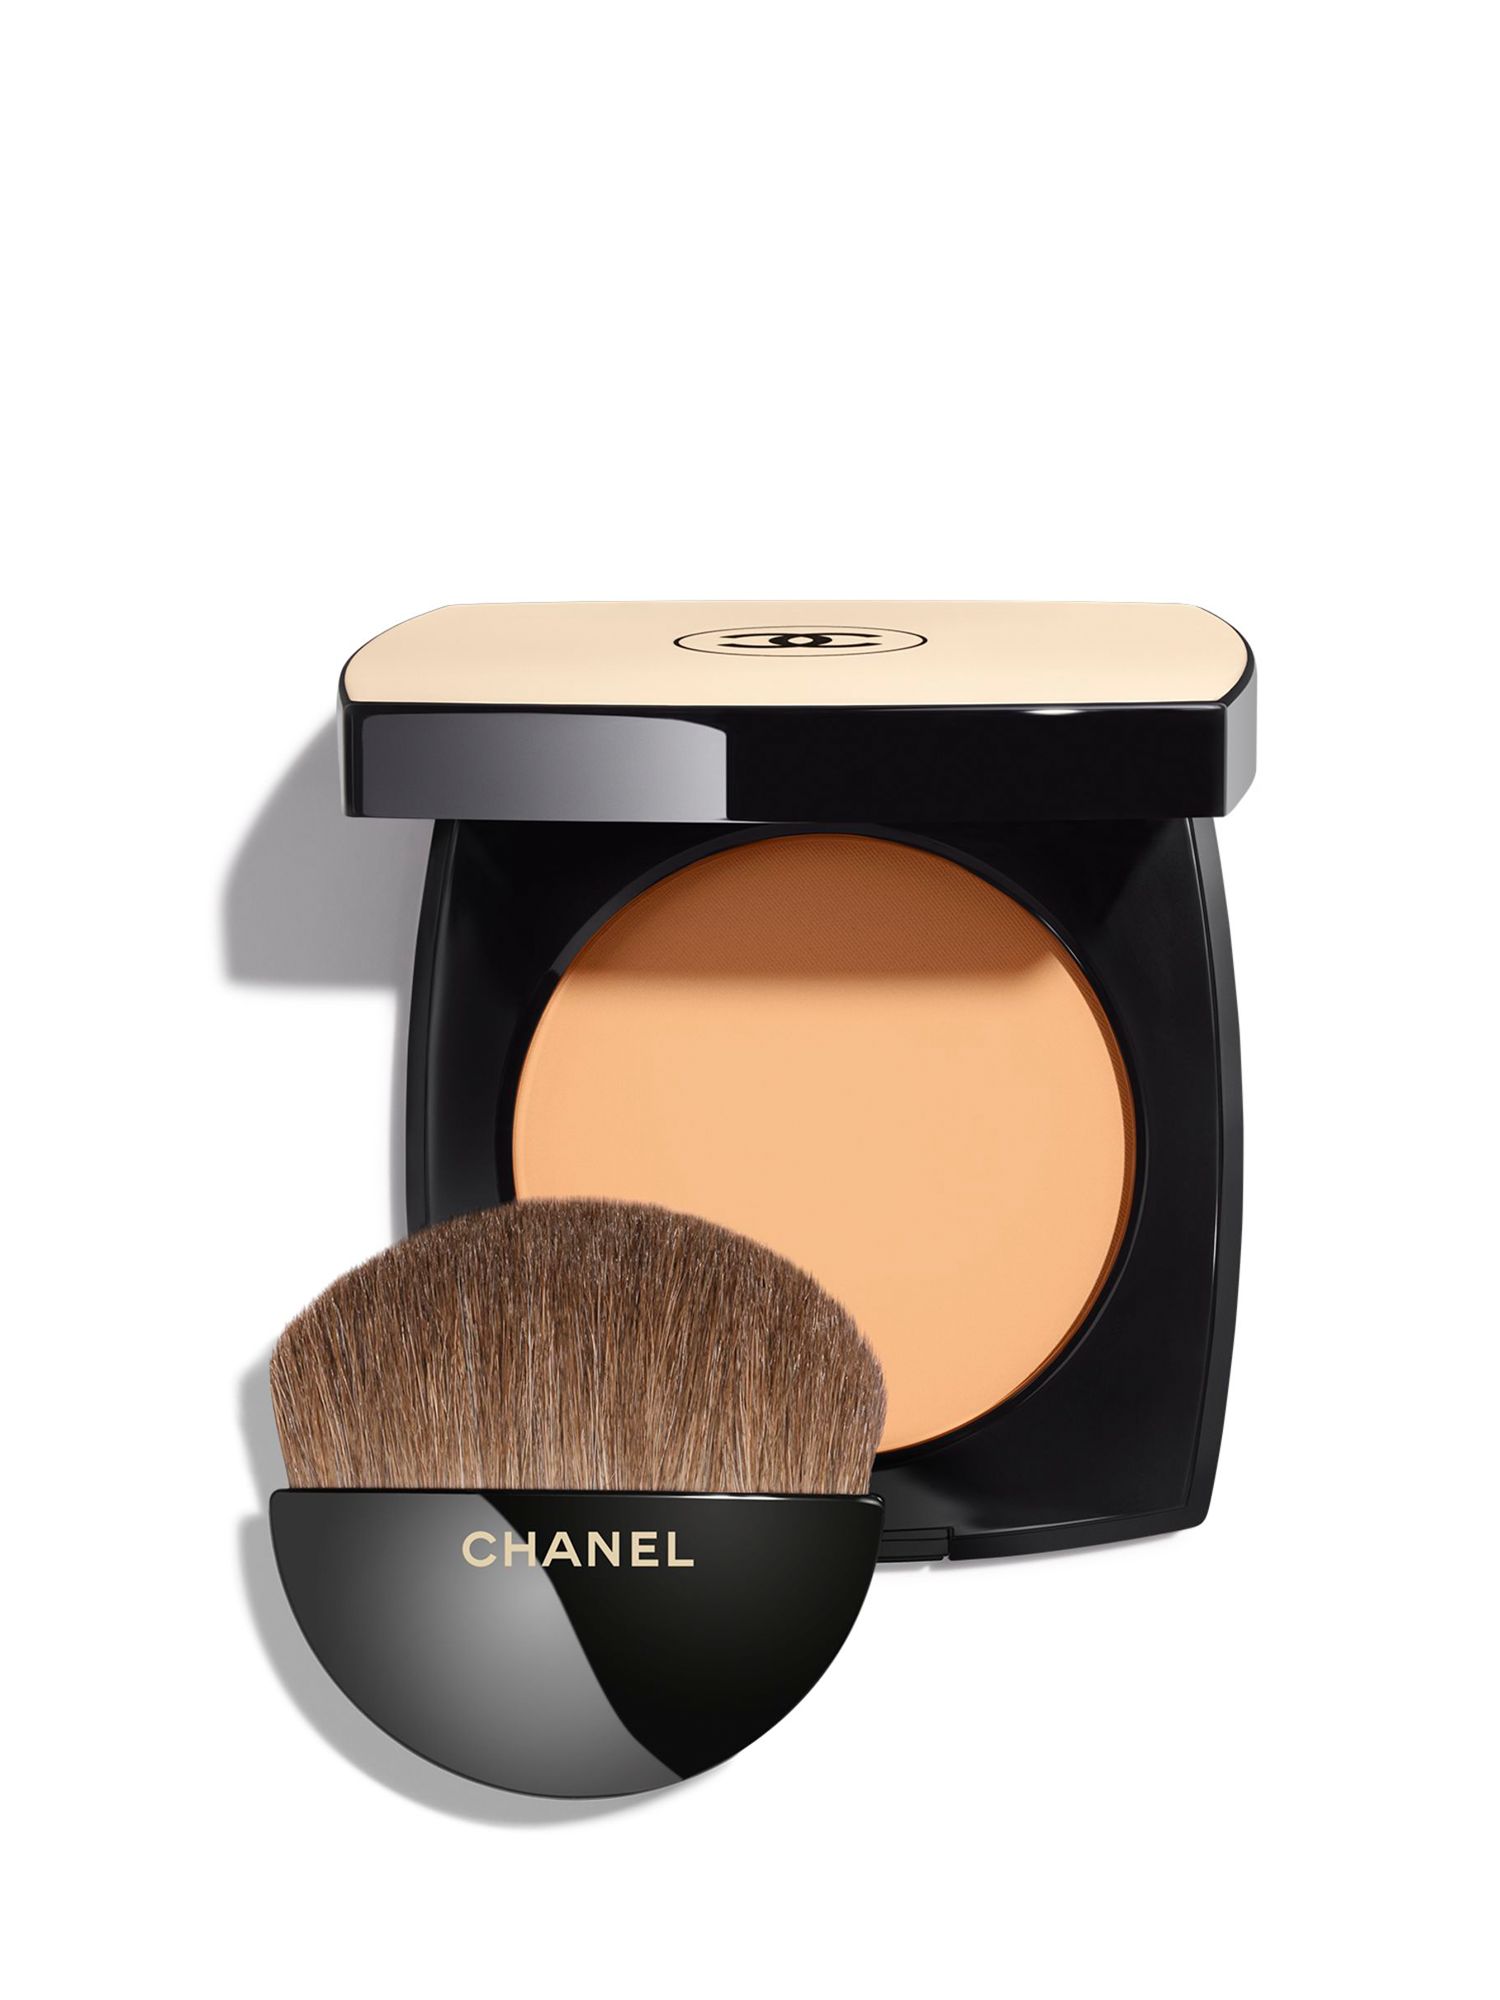 CHANEL Les Beiges Healthy Glow Powder, B30 at John Lewis & Partners